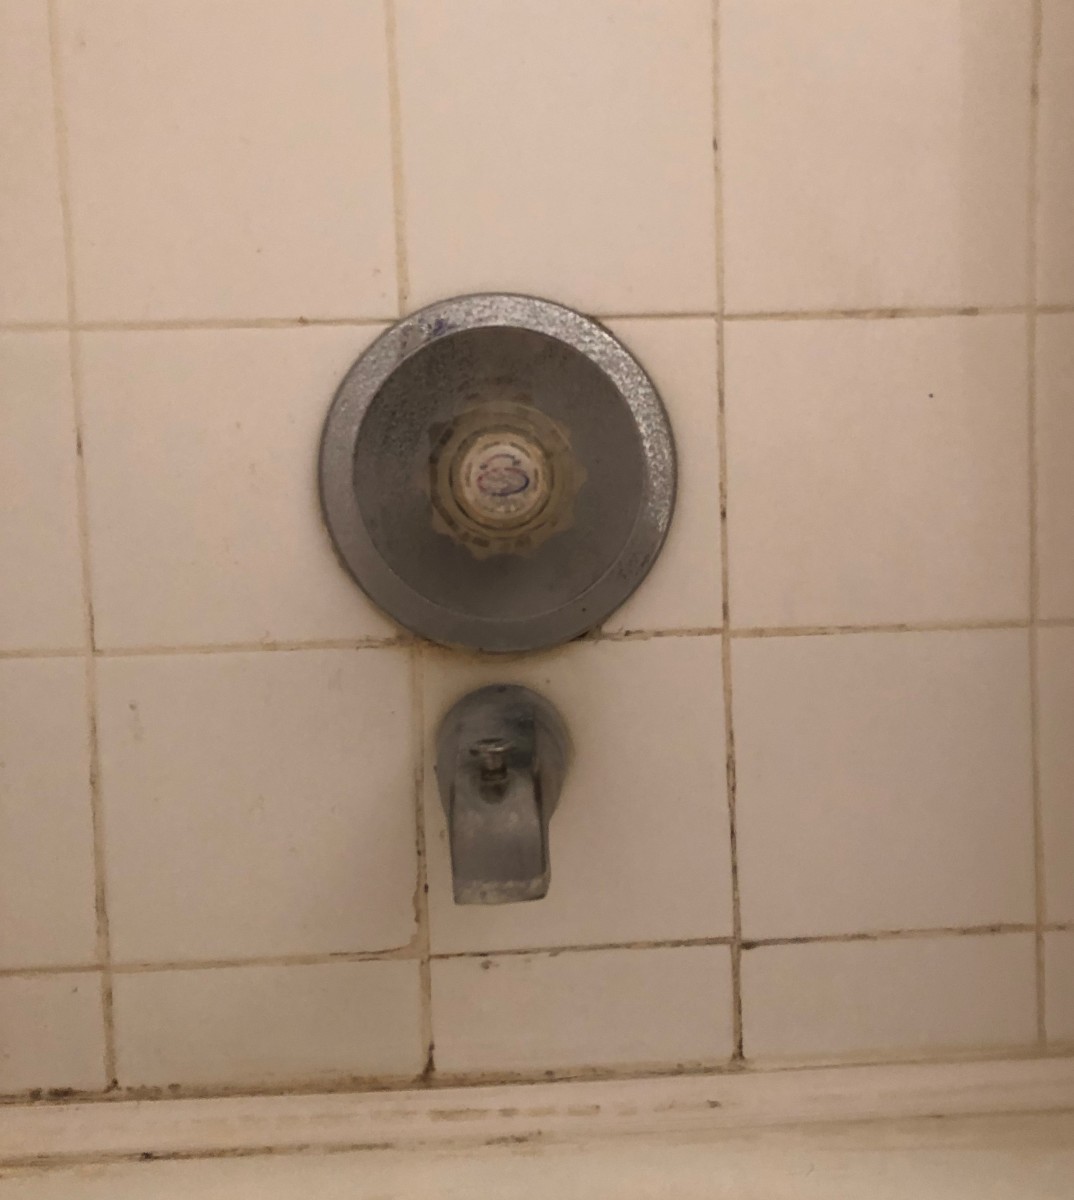 Replacing this worn shower valve with a modern model helps complete the bathroom remodeling project.